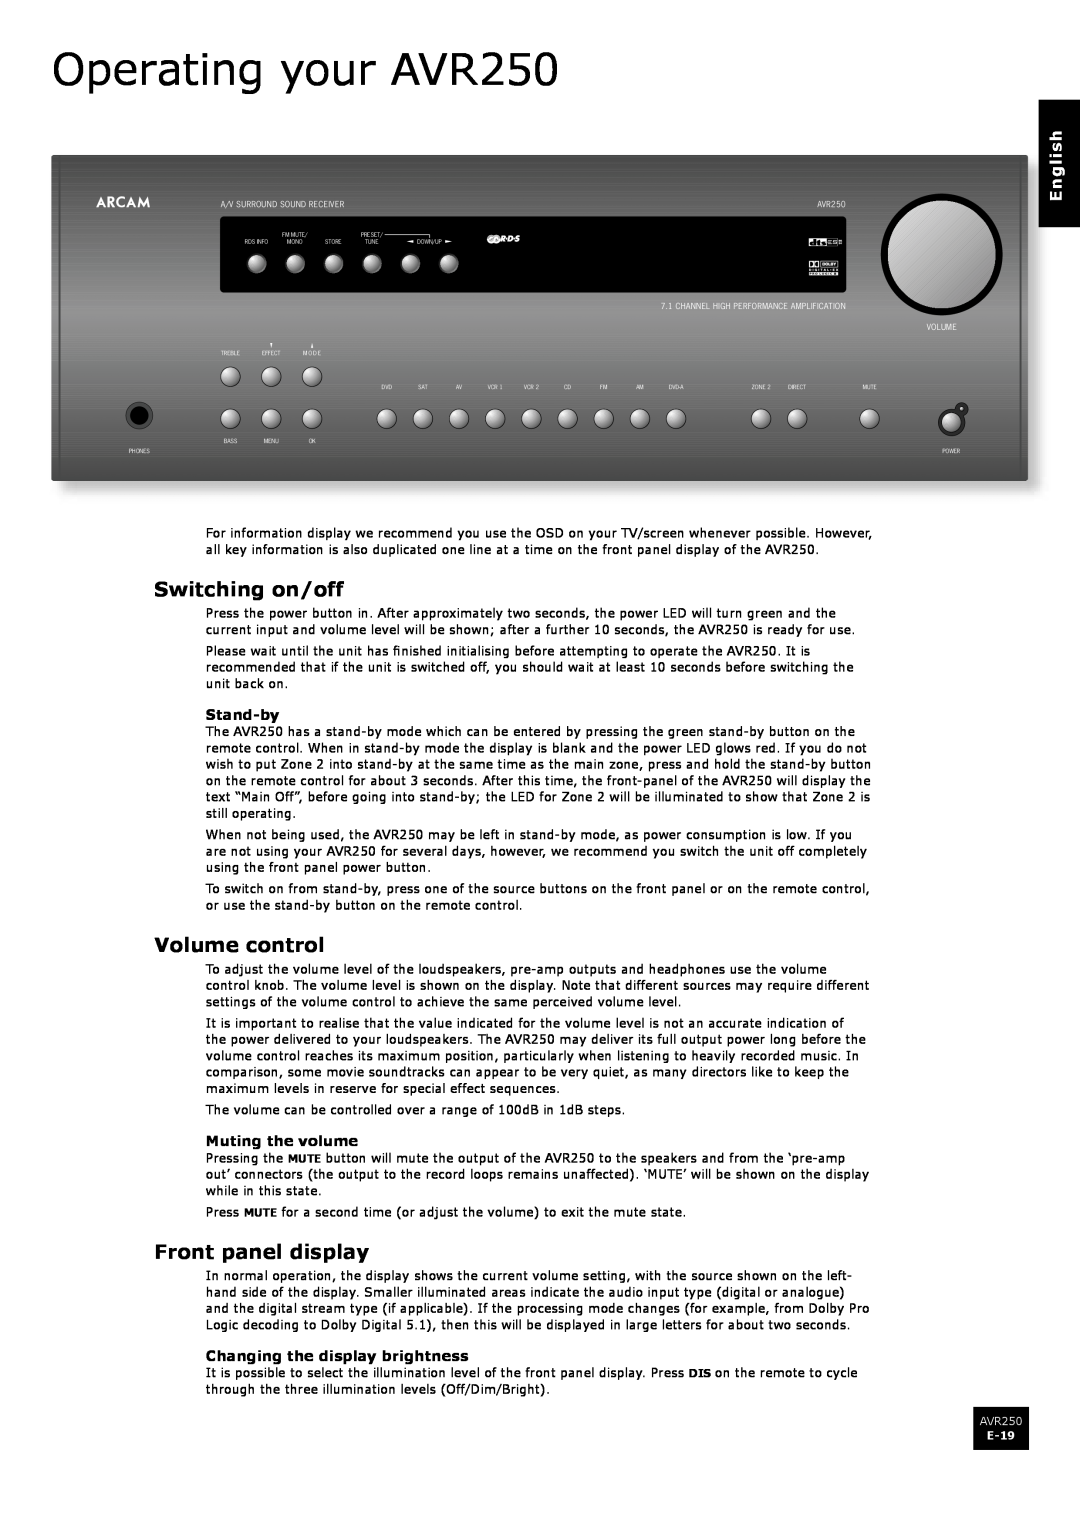 Arcam manual Operating your AVR250, Switching on/off, Volume control, Front panel display, Stand-by, Muting the volume 